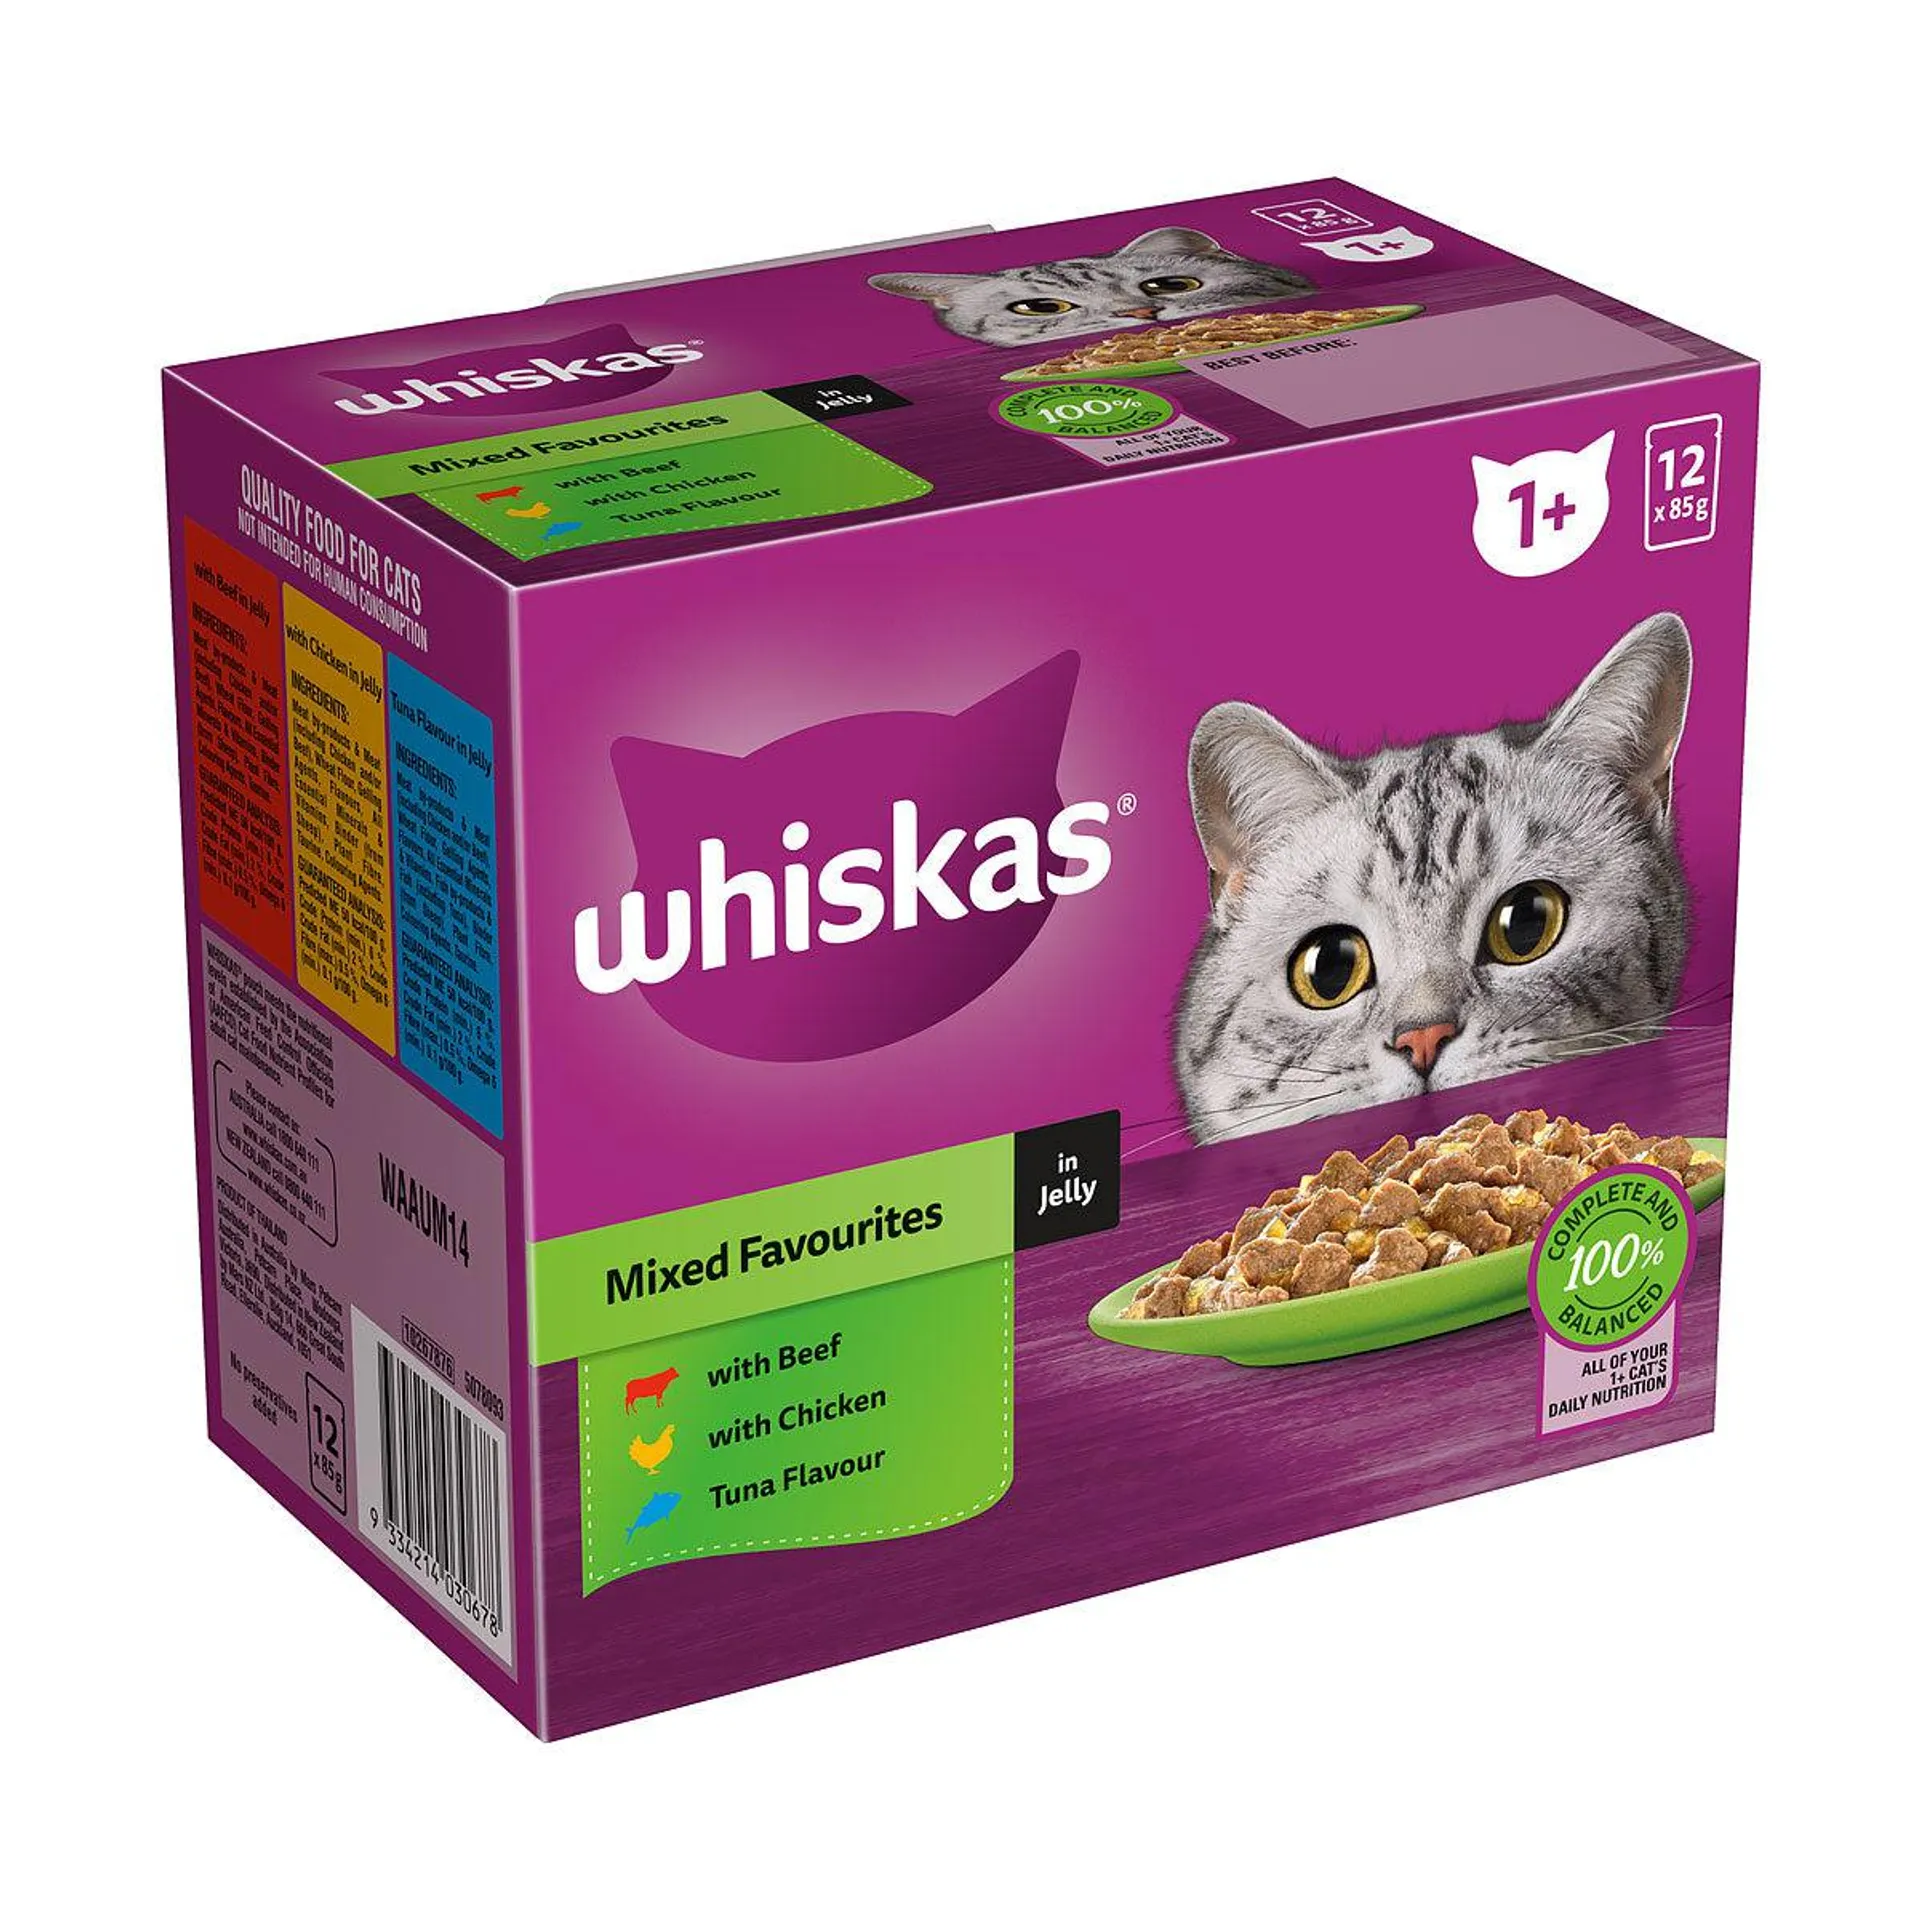 Whiskas Cat Food Mixed Favourites In Jelly 12x85g